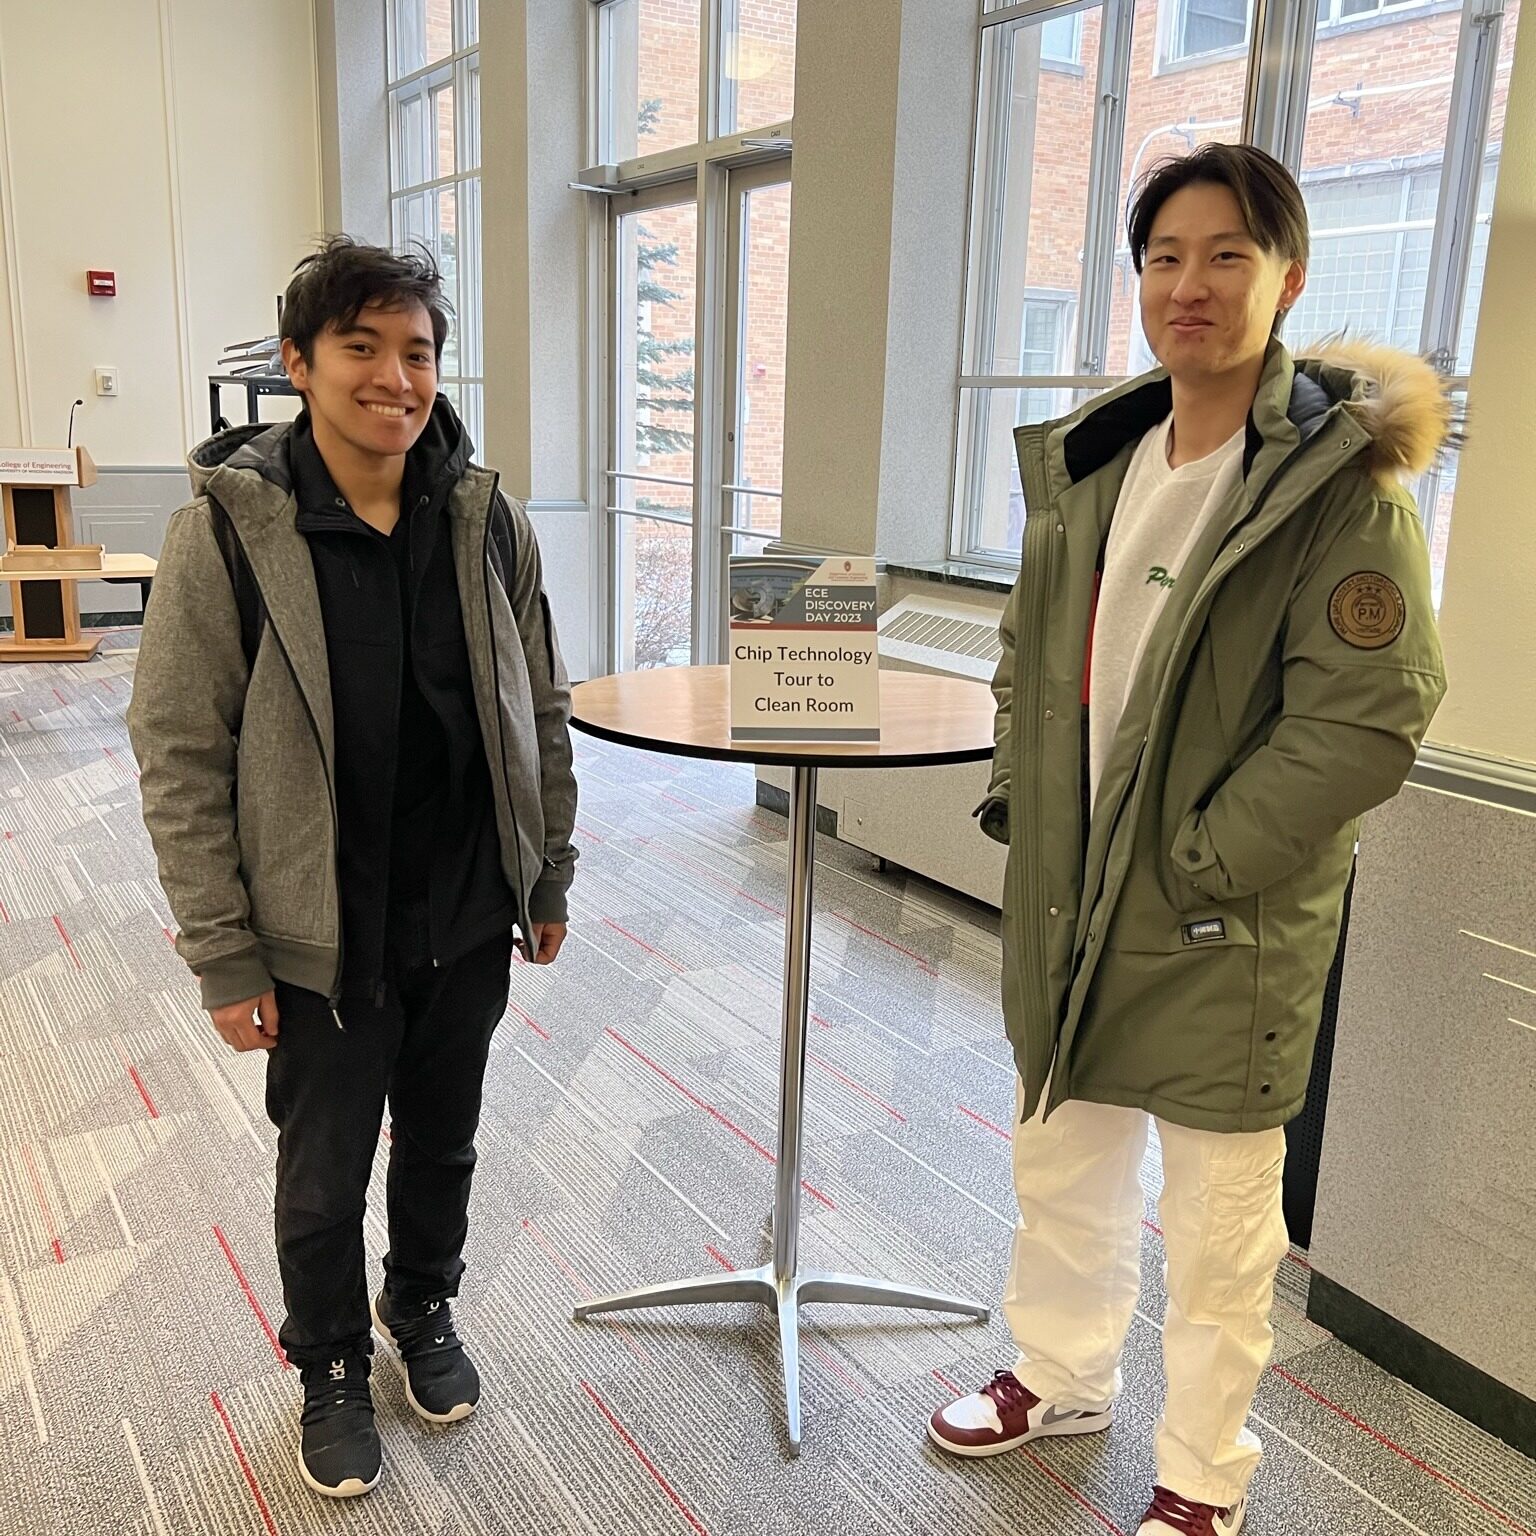 Jesus Perez and Timothy Shih standing by a tall table in the Cheney Room in Engineering Hall